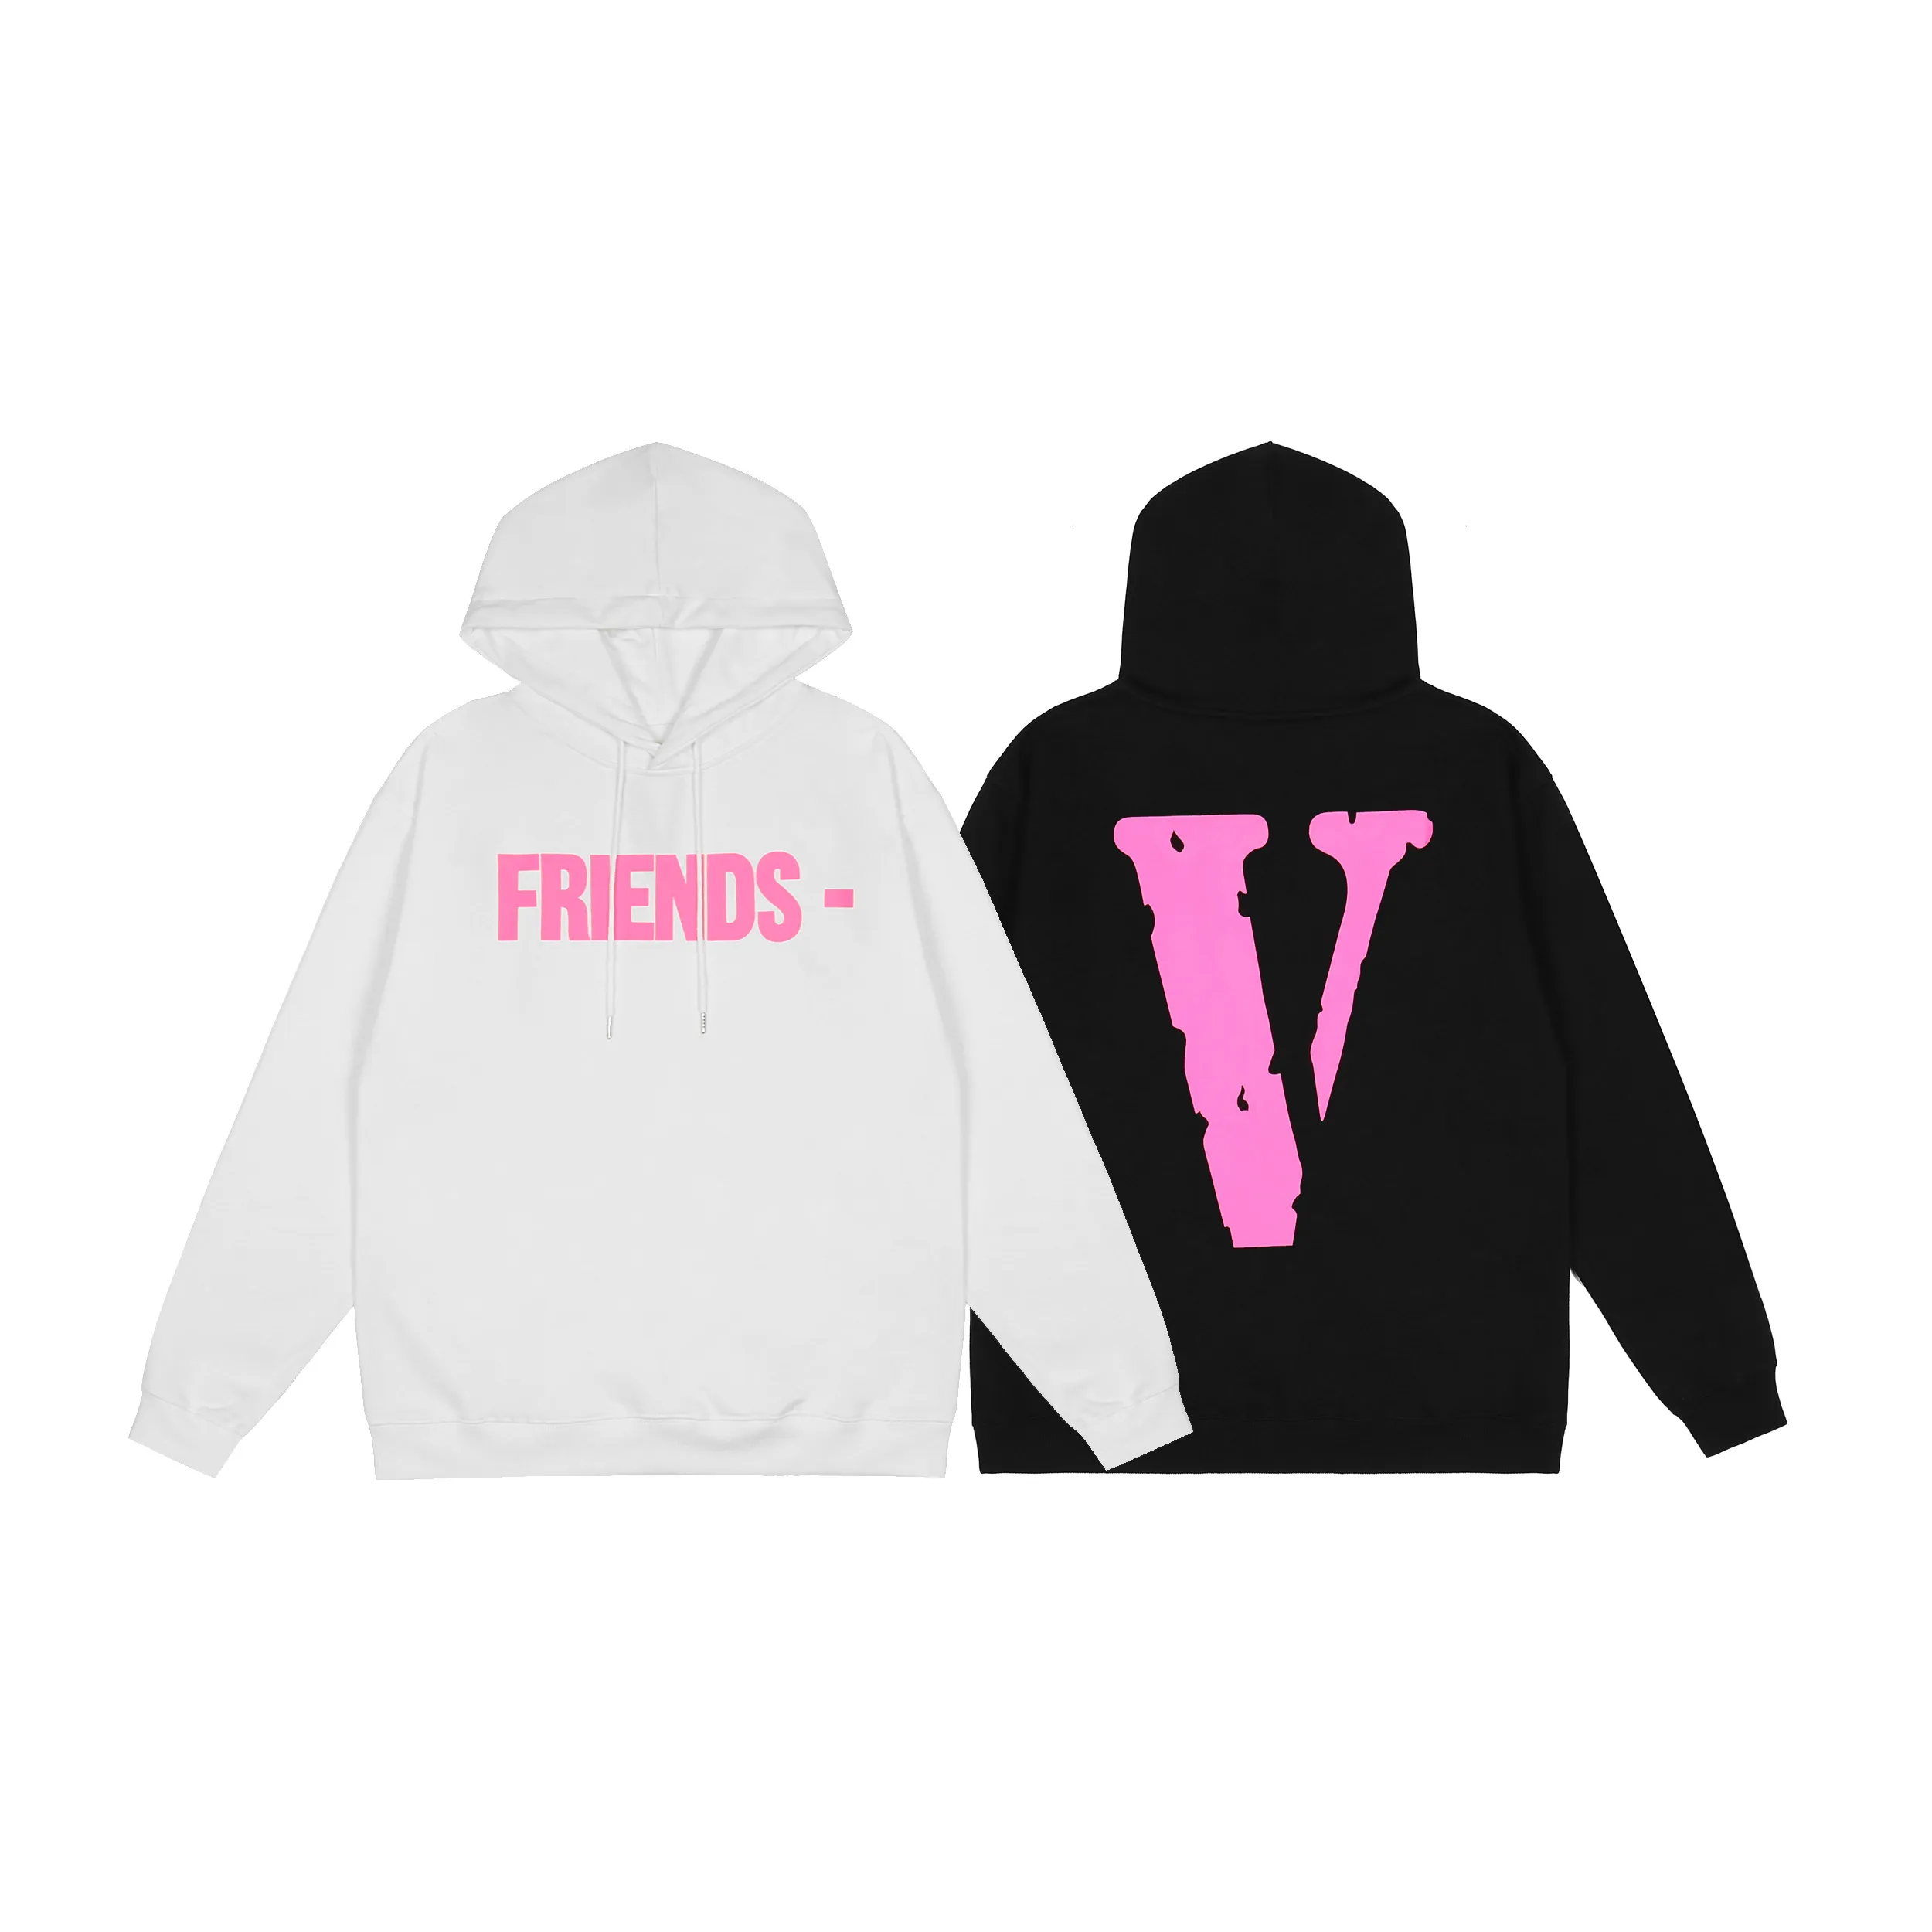 VLONE Hoodie New Cotton Lycra Fabric Men's And Women's Reflective luminous Long Sleeved Casual Classic Fashion Trend Men's Hoodie US SIZE S-XL 6690